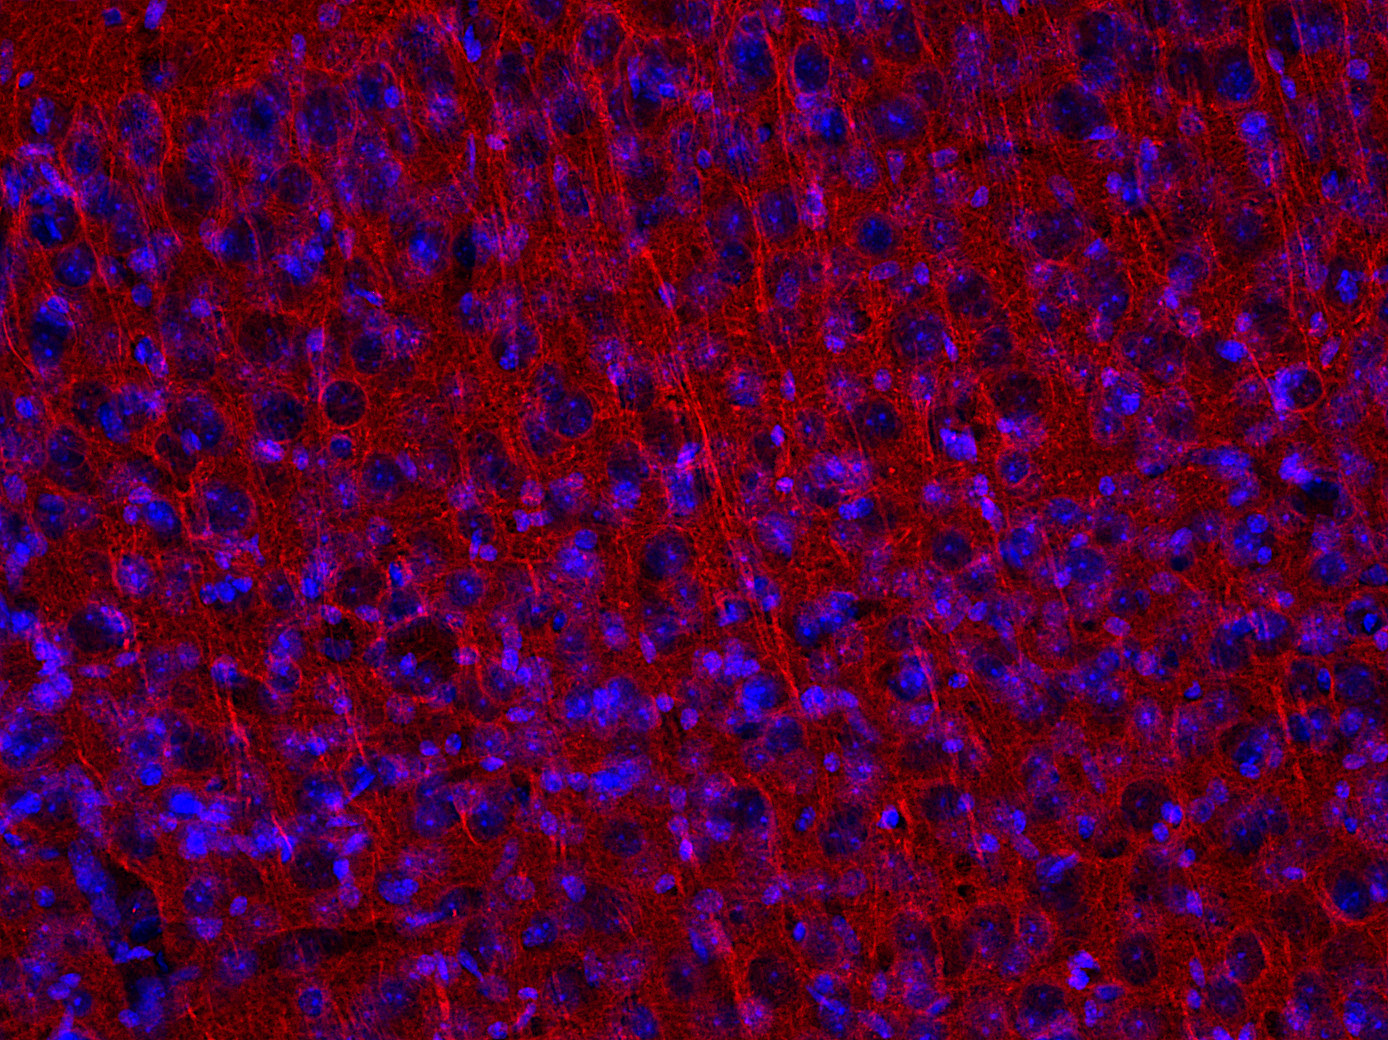 Figure 5: Indirect immunostaining of PFA fixed mouse cortex section with mouse anti-β3-Tubulin 